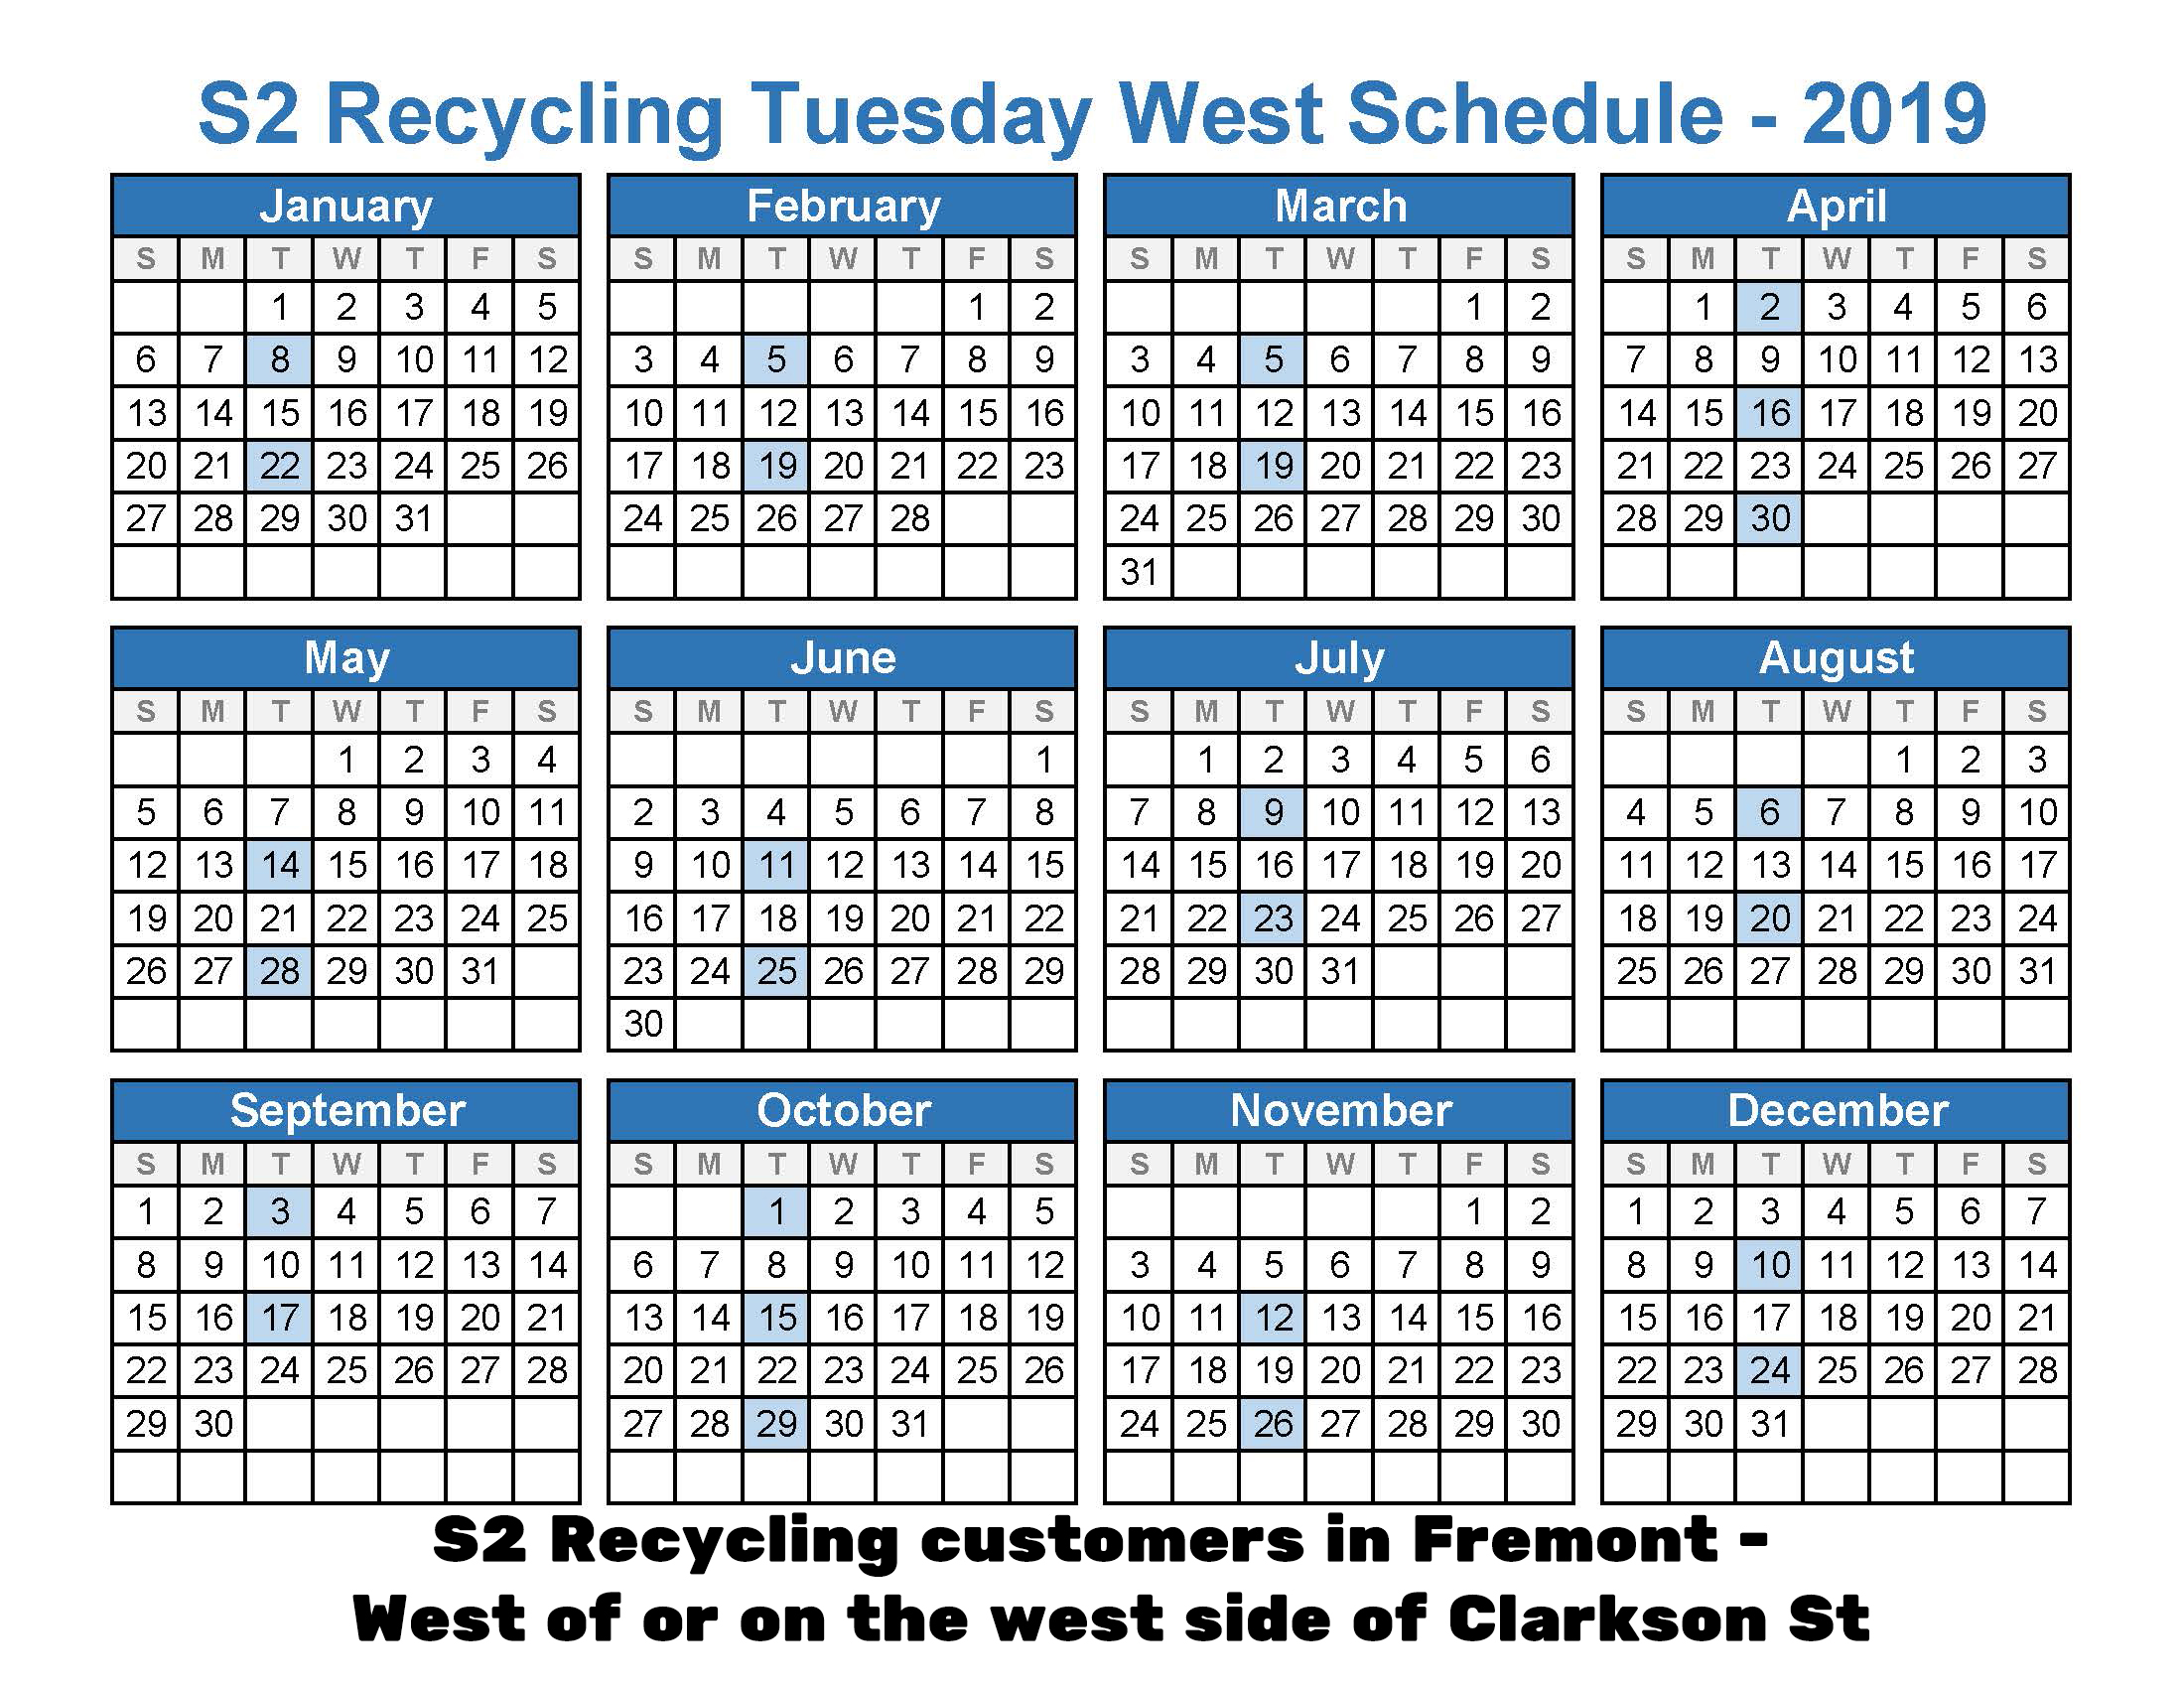 2019 Recycling Tuesday West Schedule